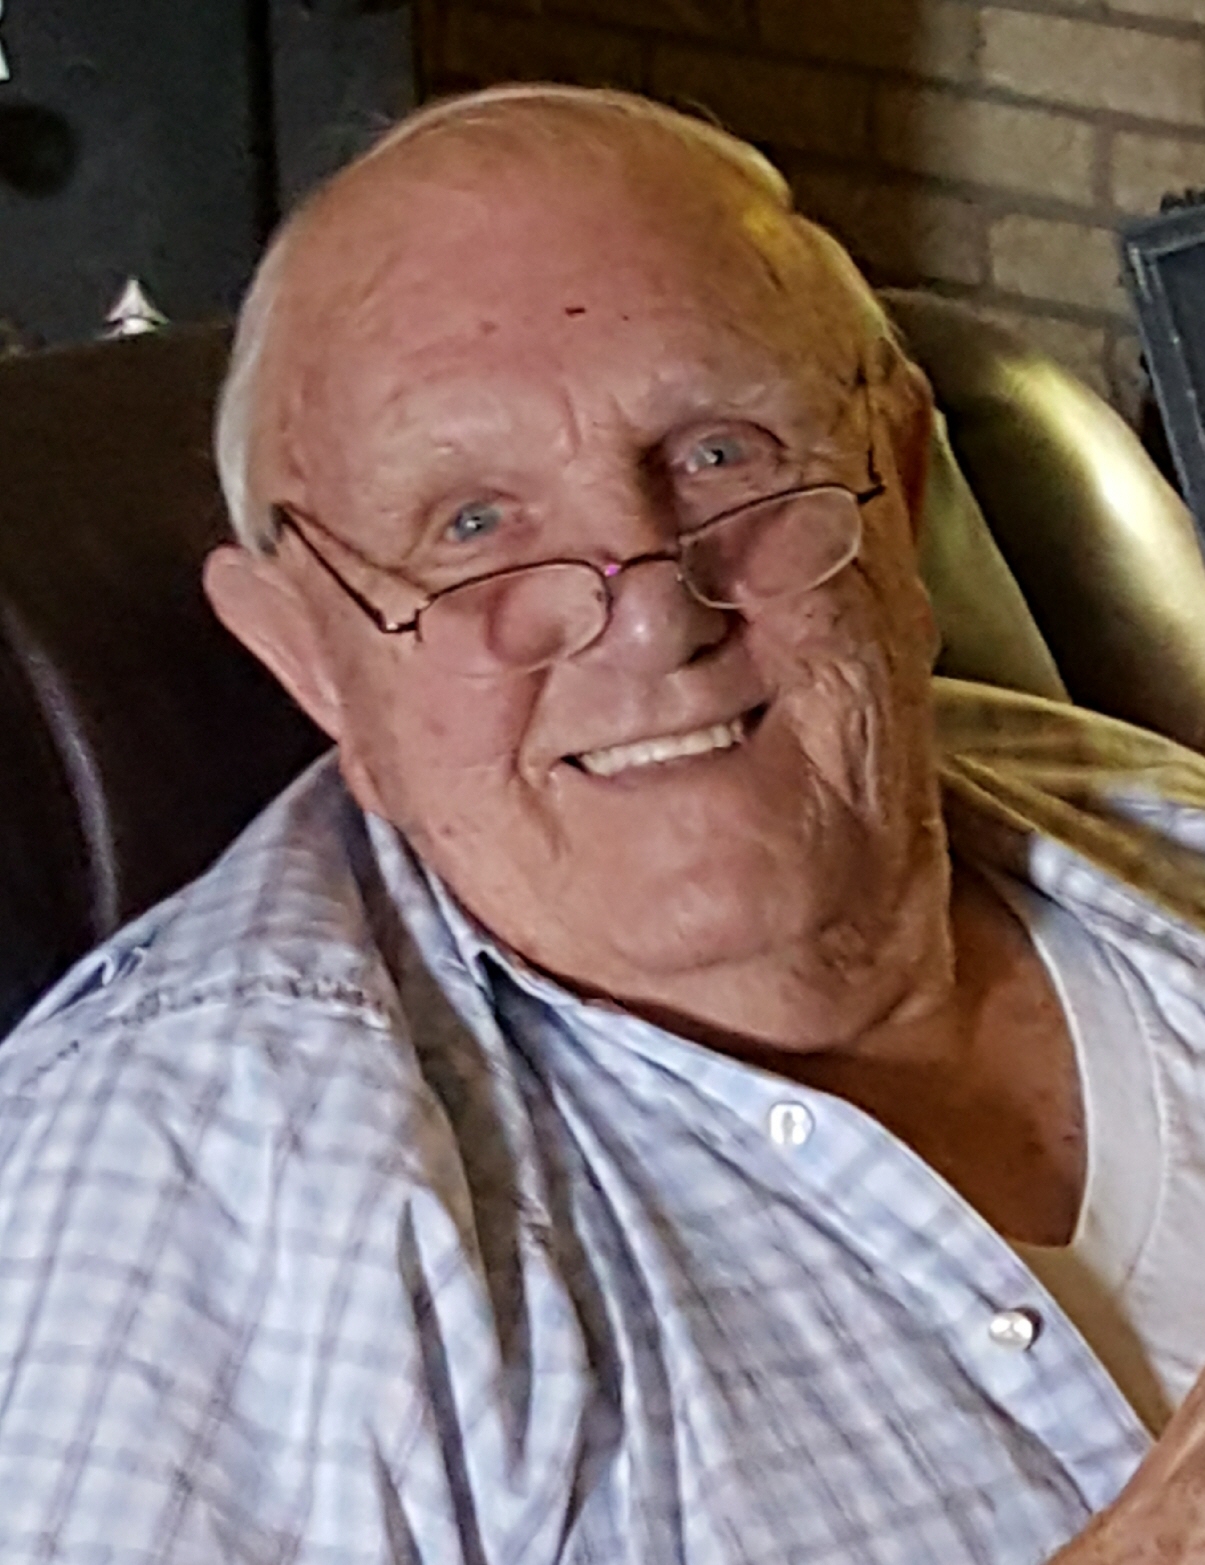 Obituary information for Ray Brooks